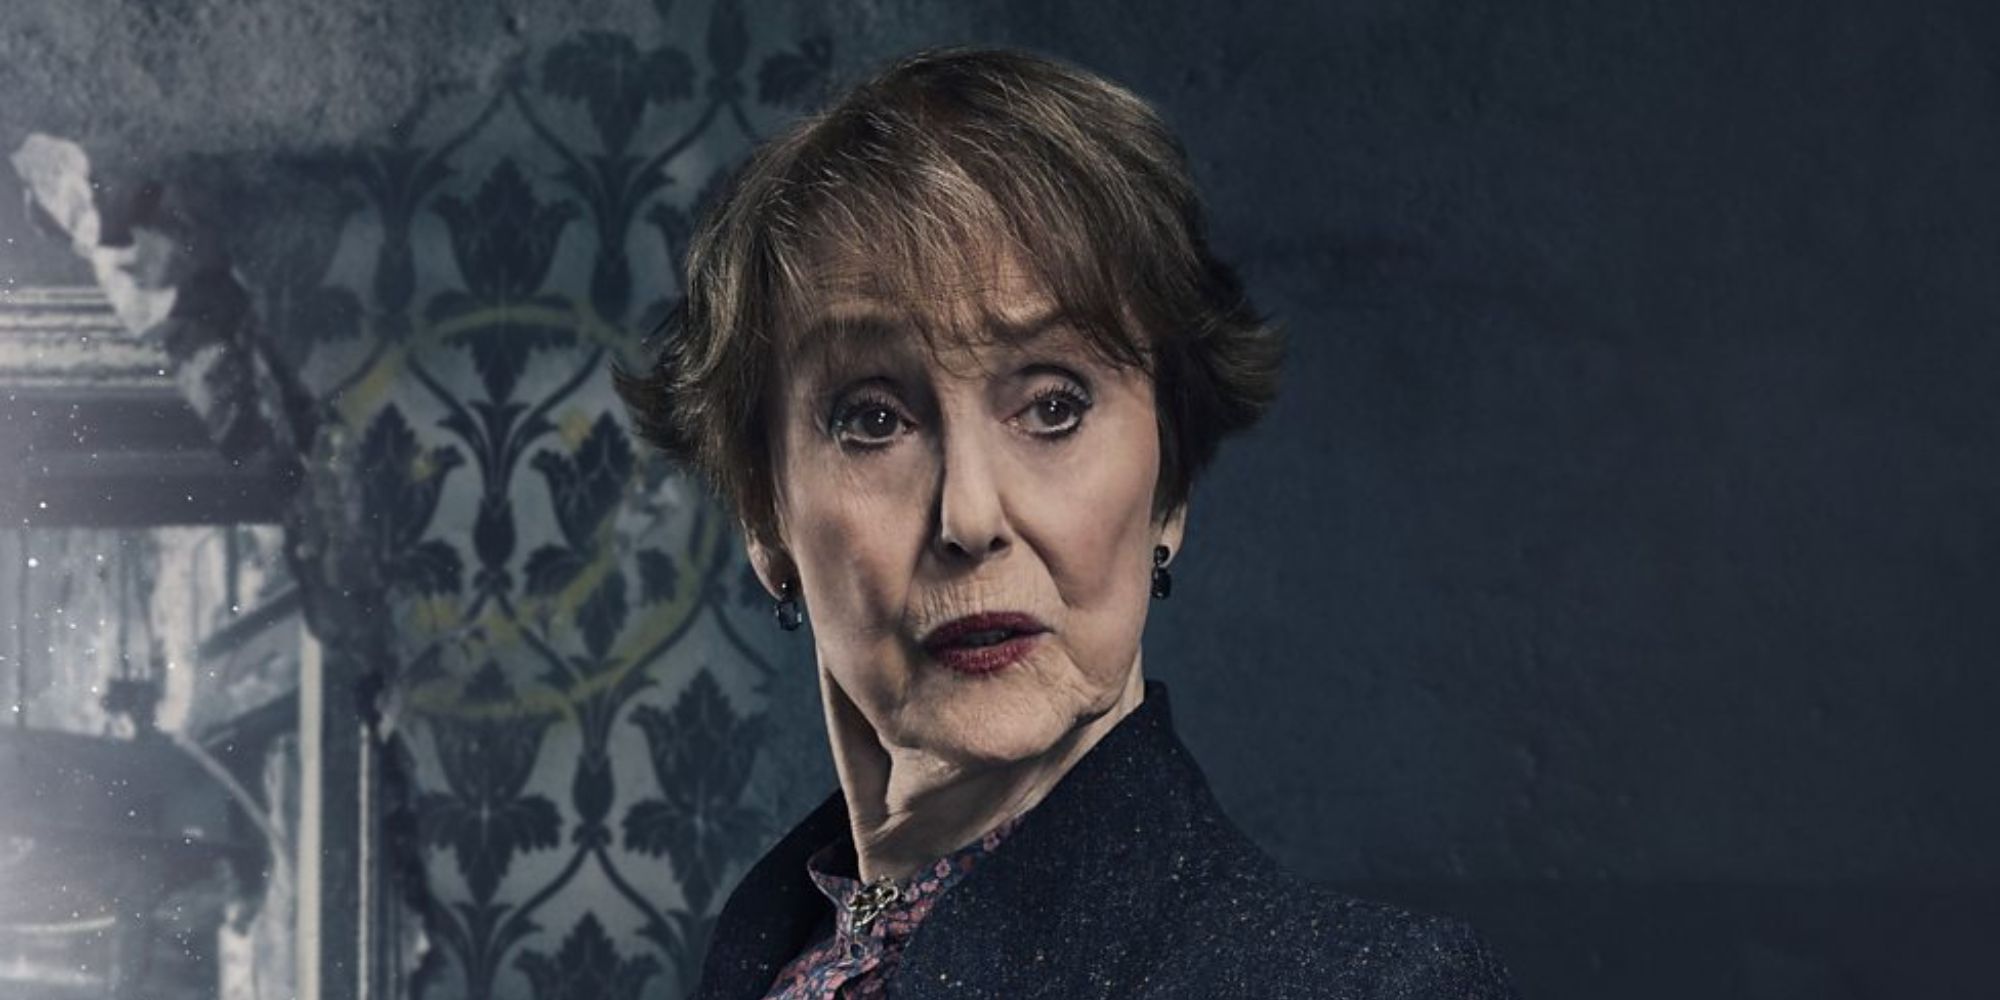 From 'Sherlock' TV series: Mrs Hudson played by Una Stubbs